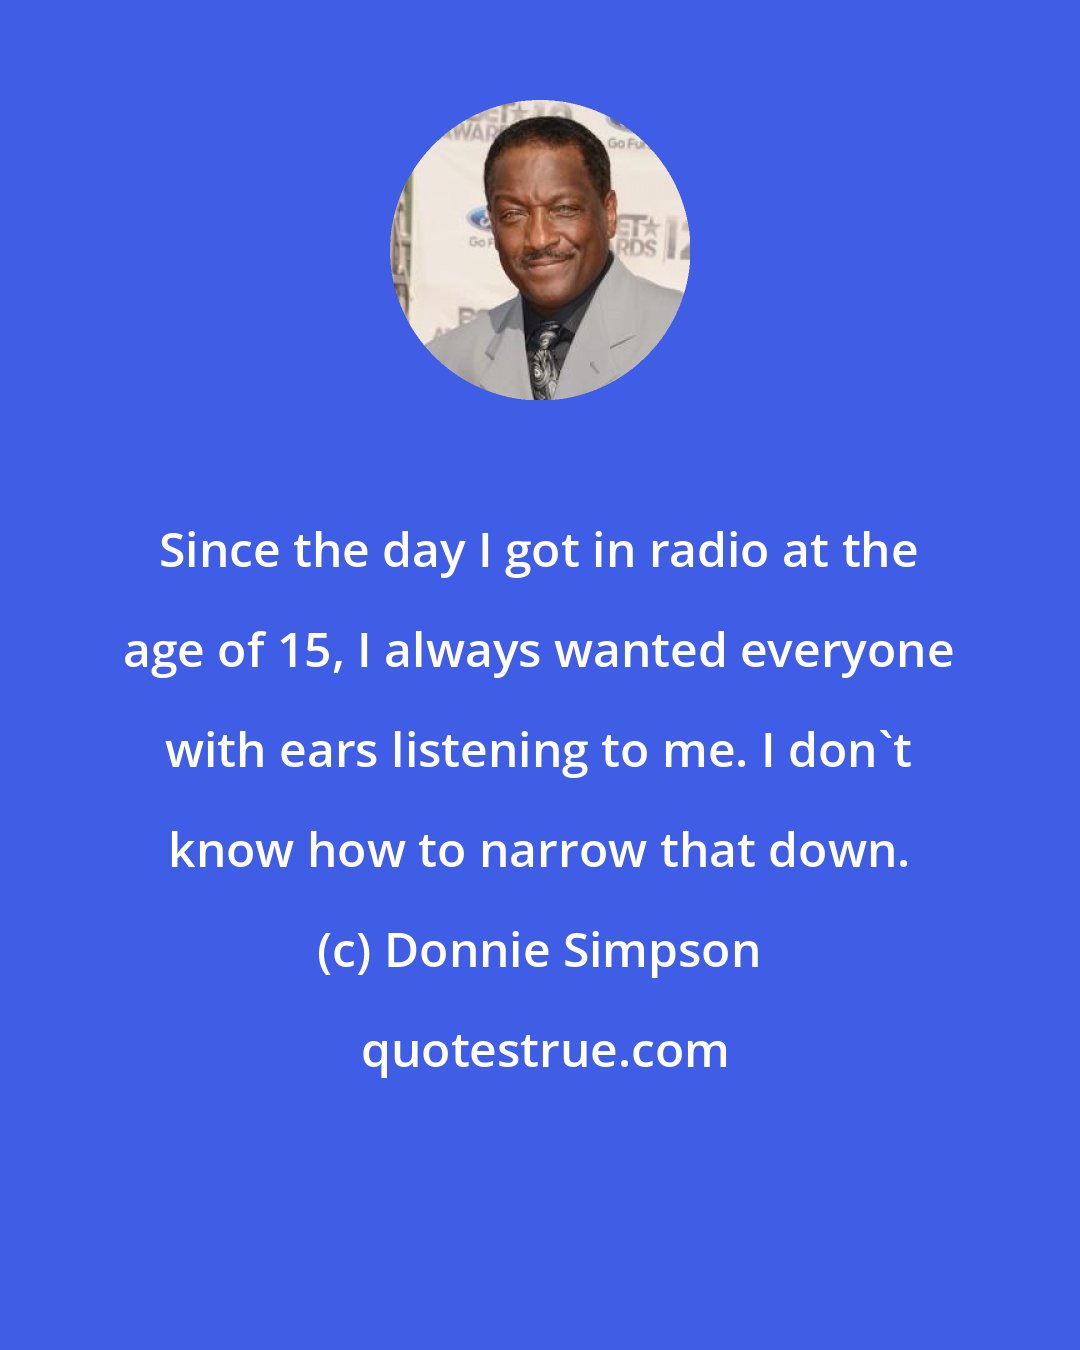 Donnie Simpson: Since the day I got in radio at the age of 15, I always wanted everyone with ears listening to me. I don't know how to narrow that down.